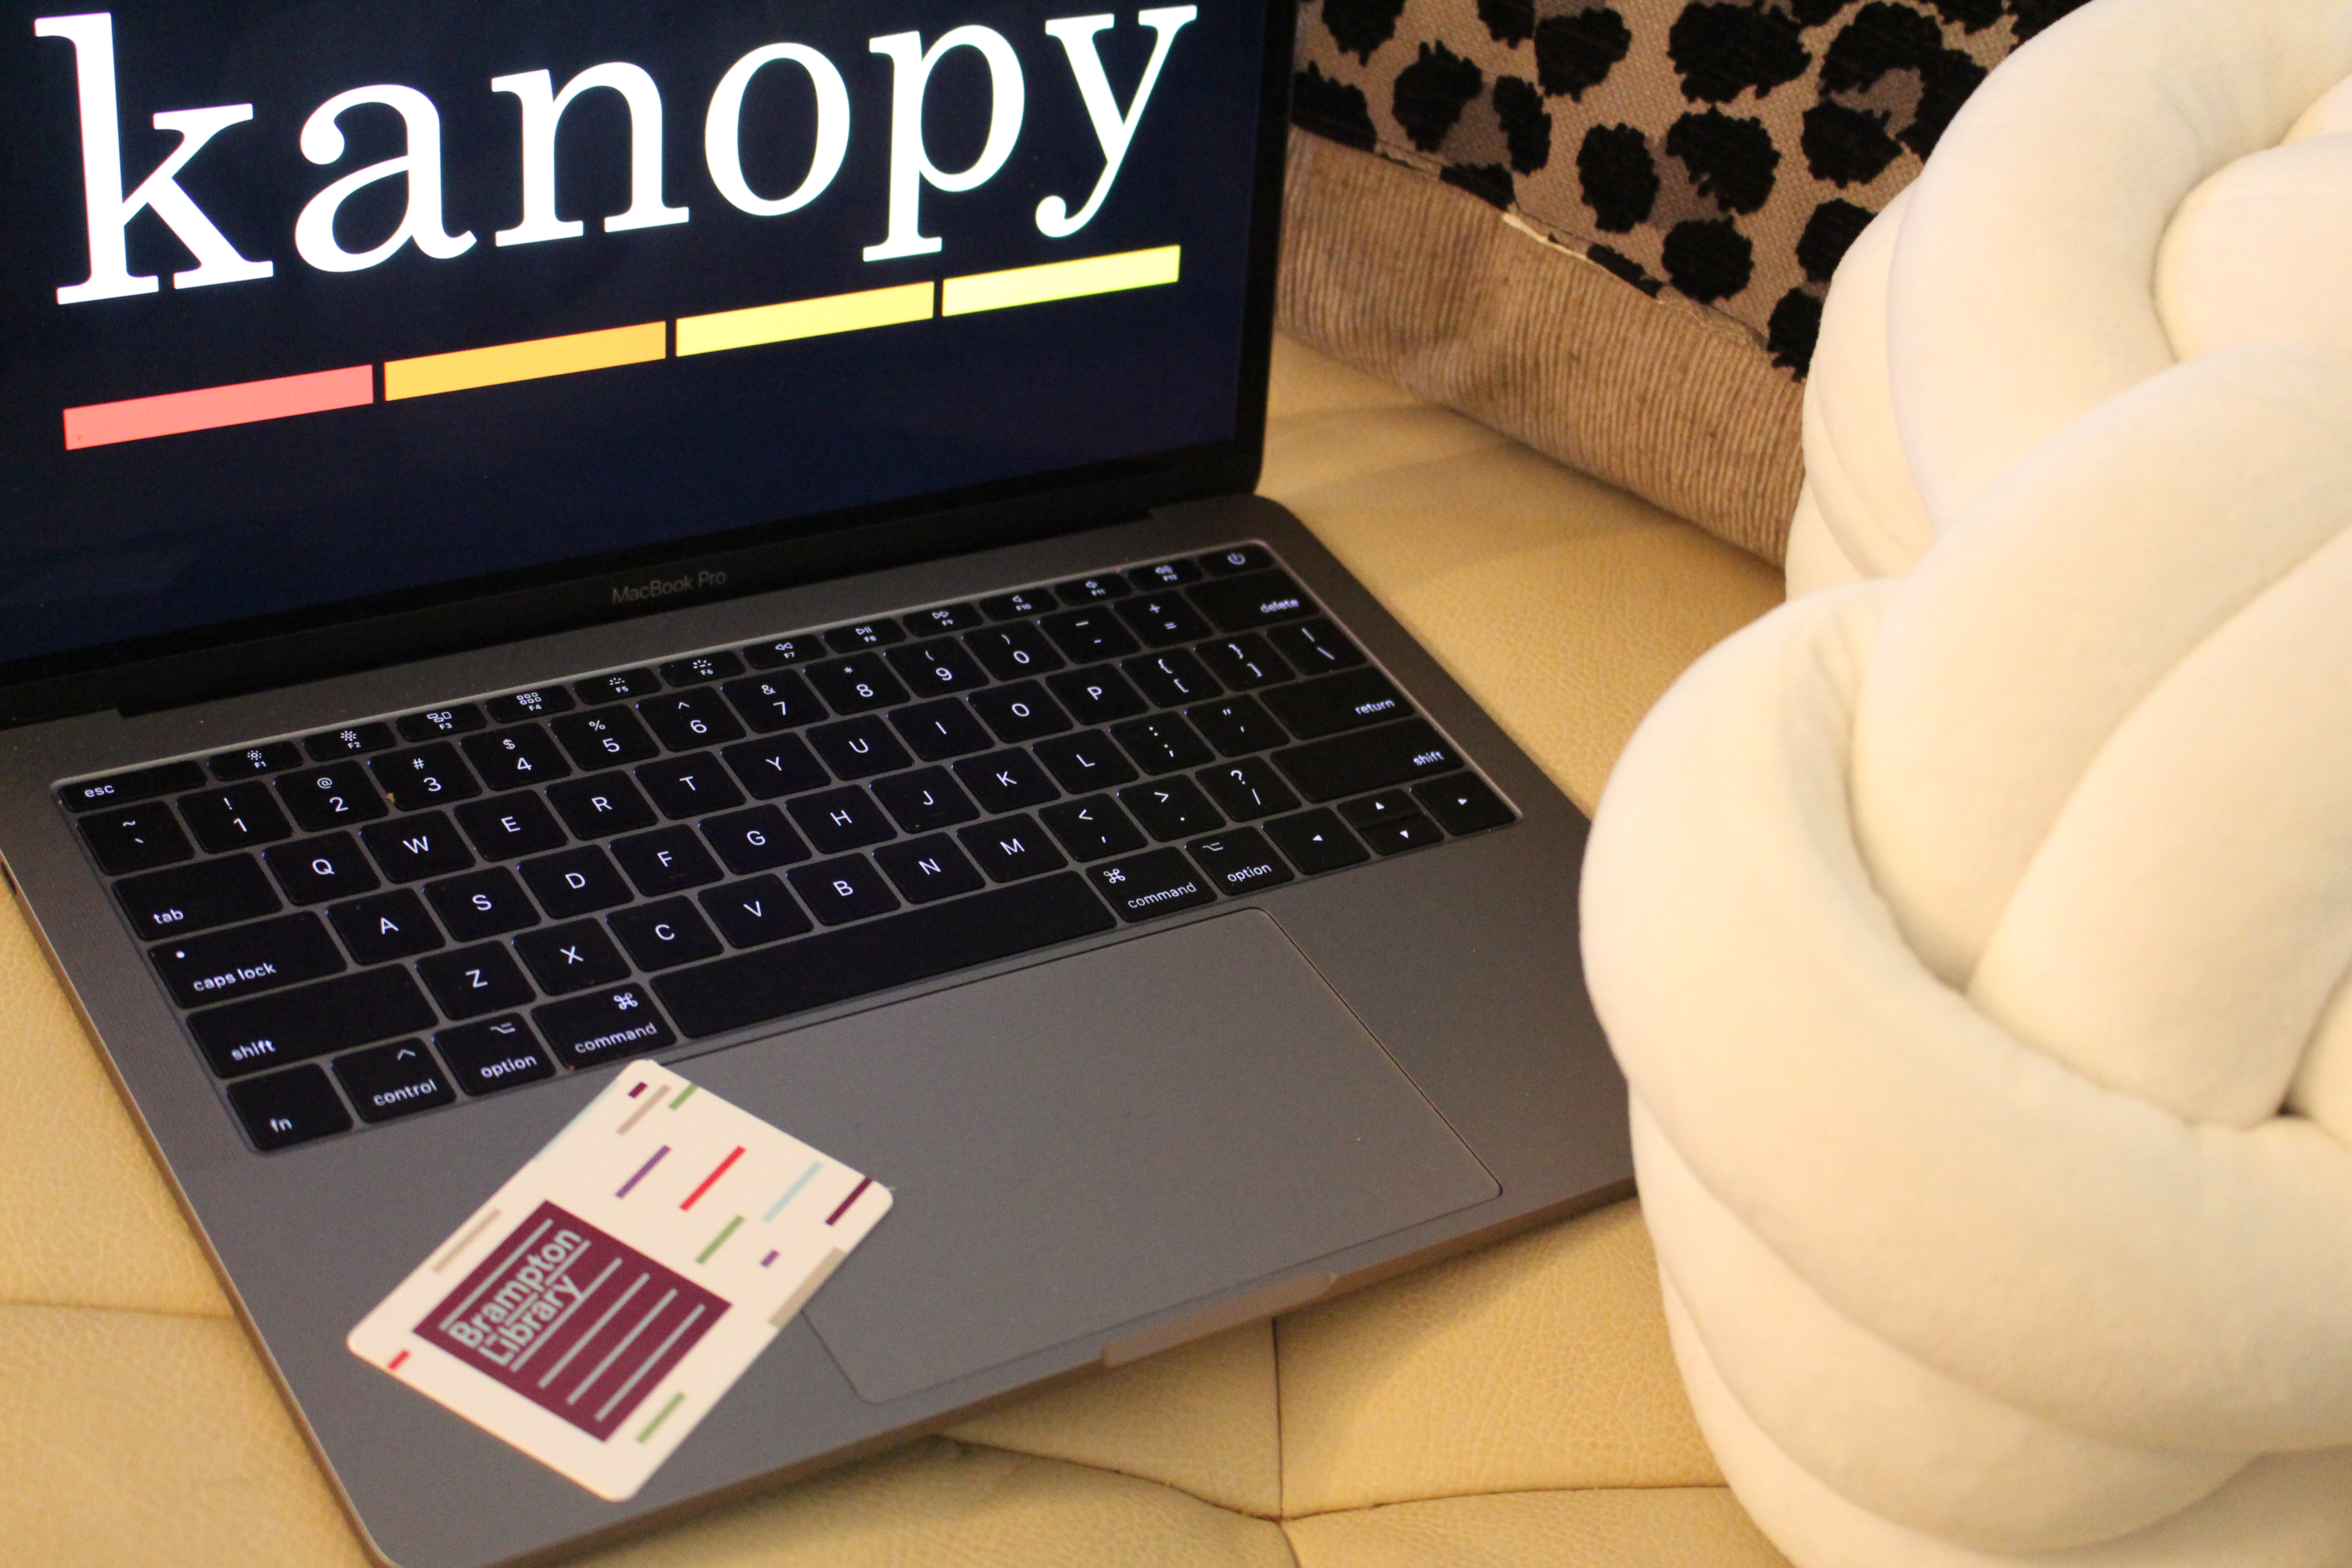 Kanopy app on the computer